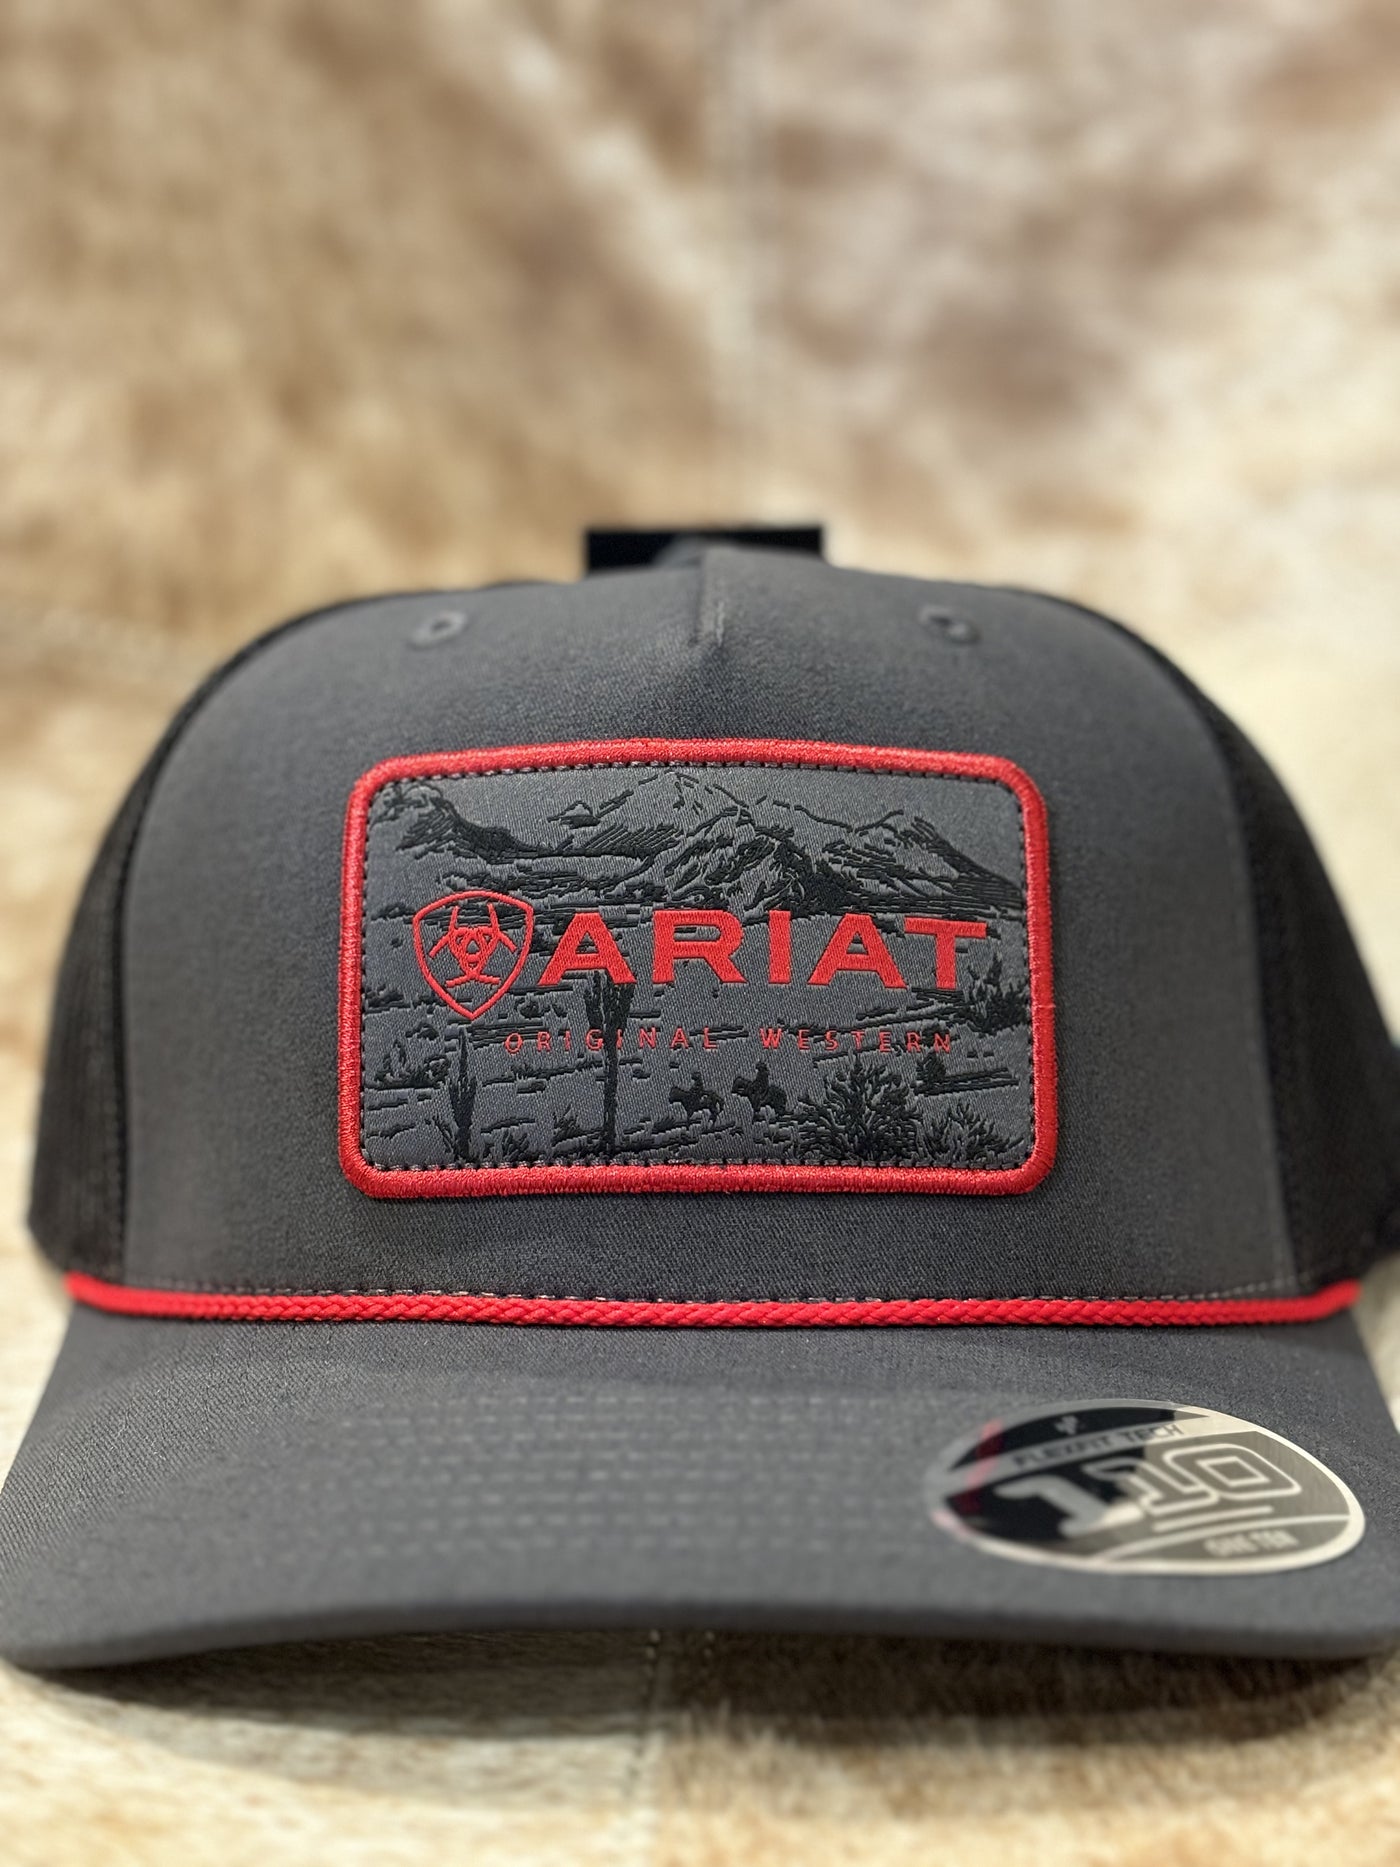 The Frontier Hat by Ariat